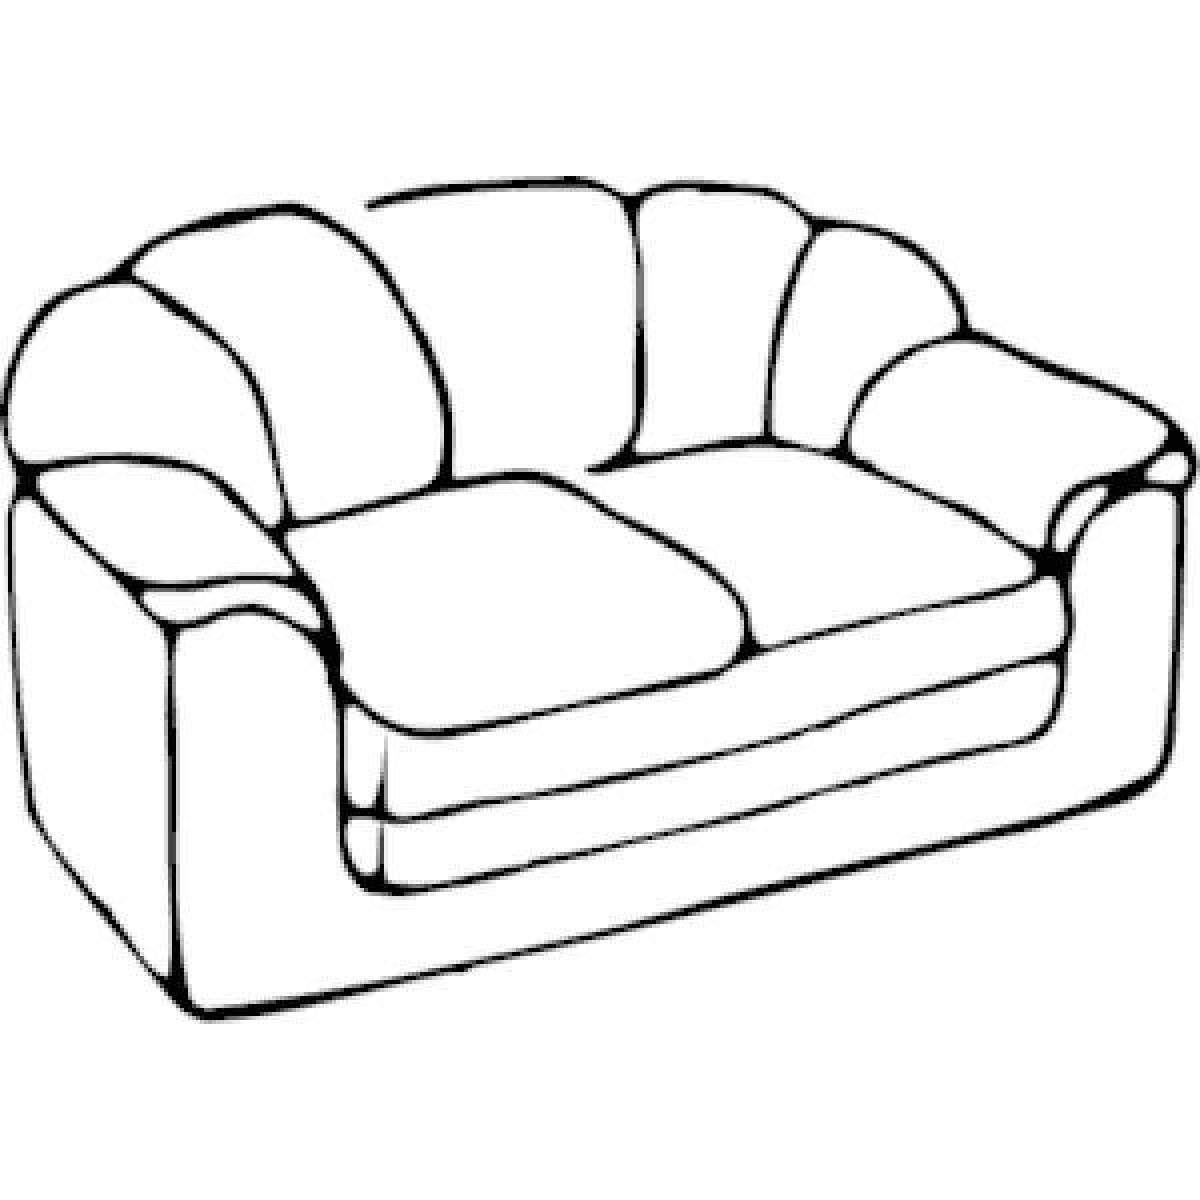 Coloring book comfortable furniture for children